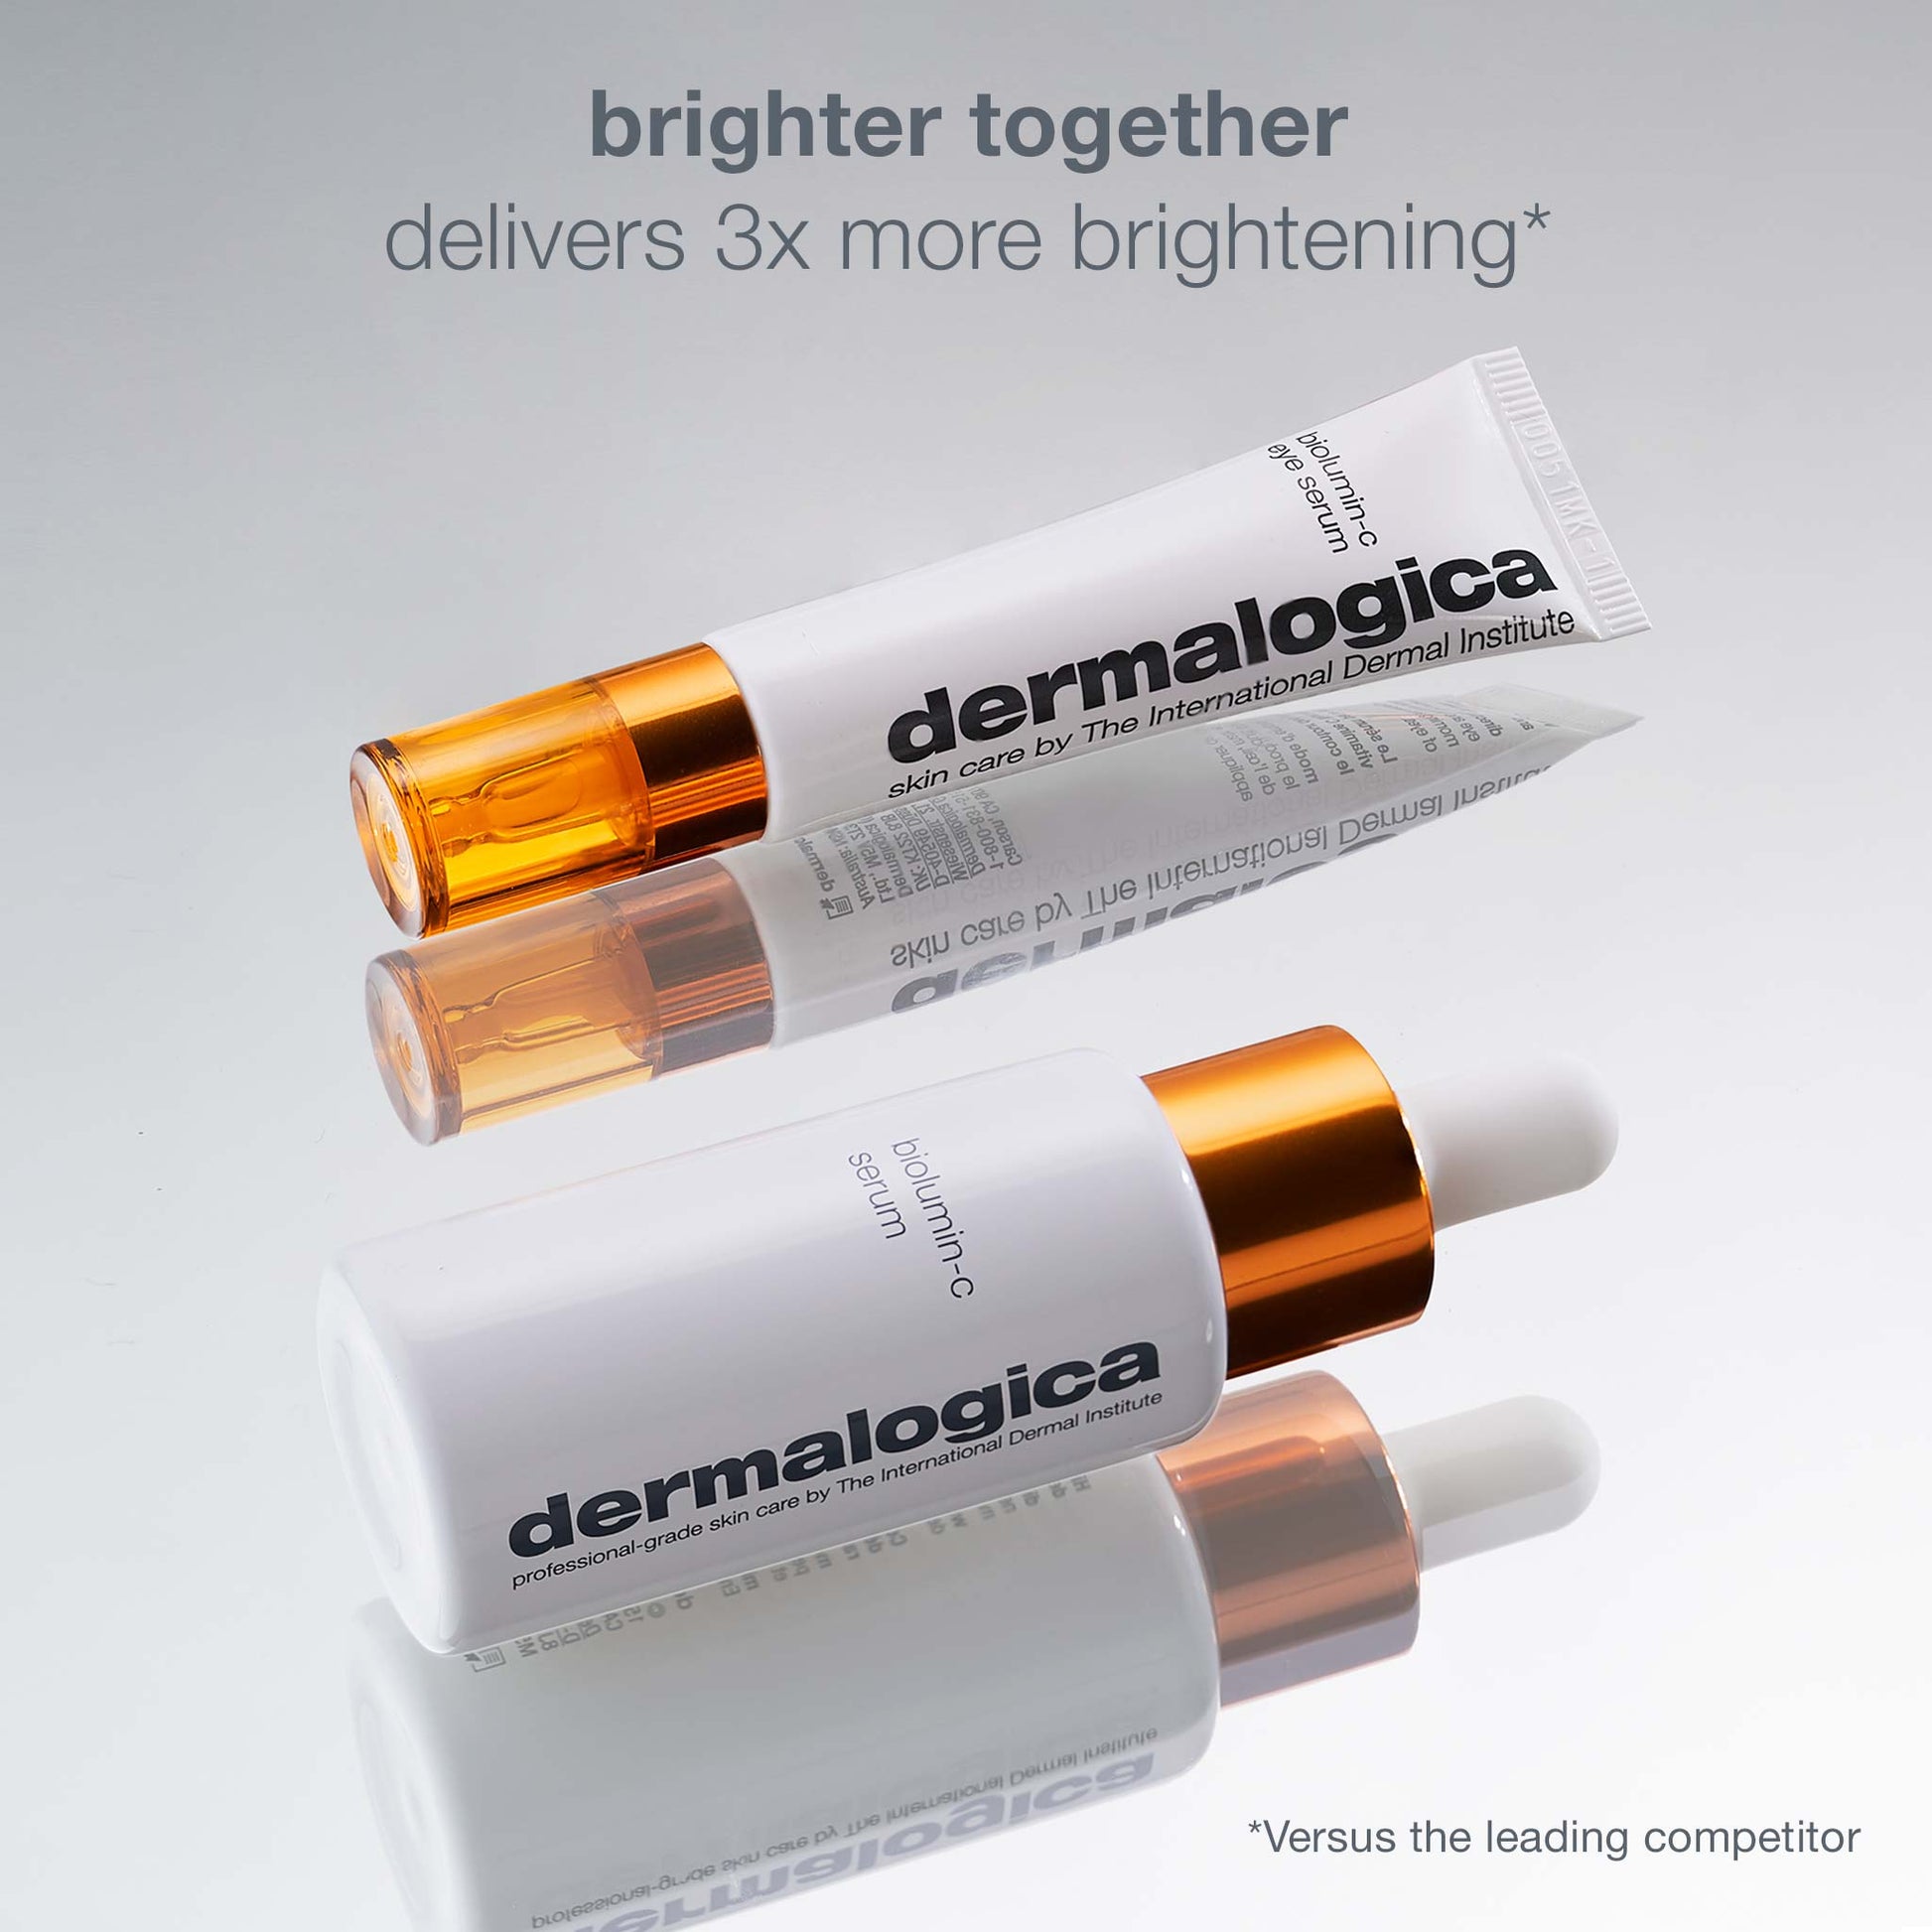 brighter together- delivers 3x more brightening*